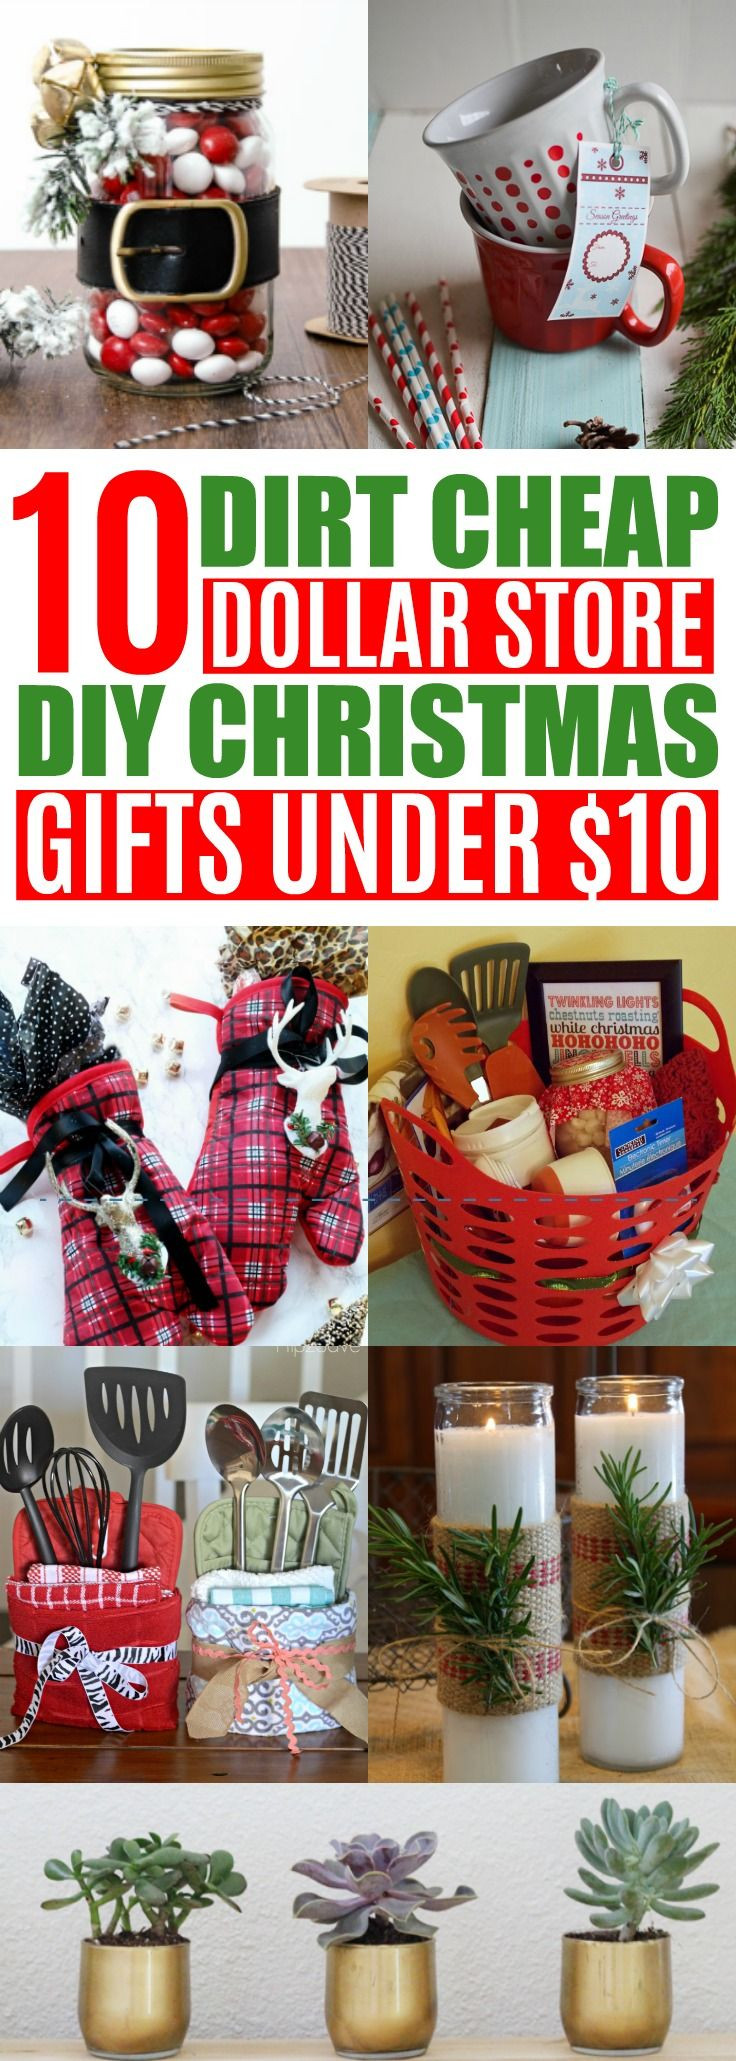 Christmas Gift Ideas On A Budget
 Best 25 Friends family ideas on Pinterest